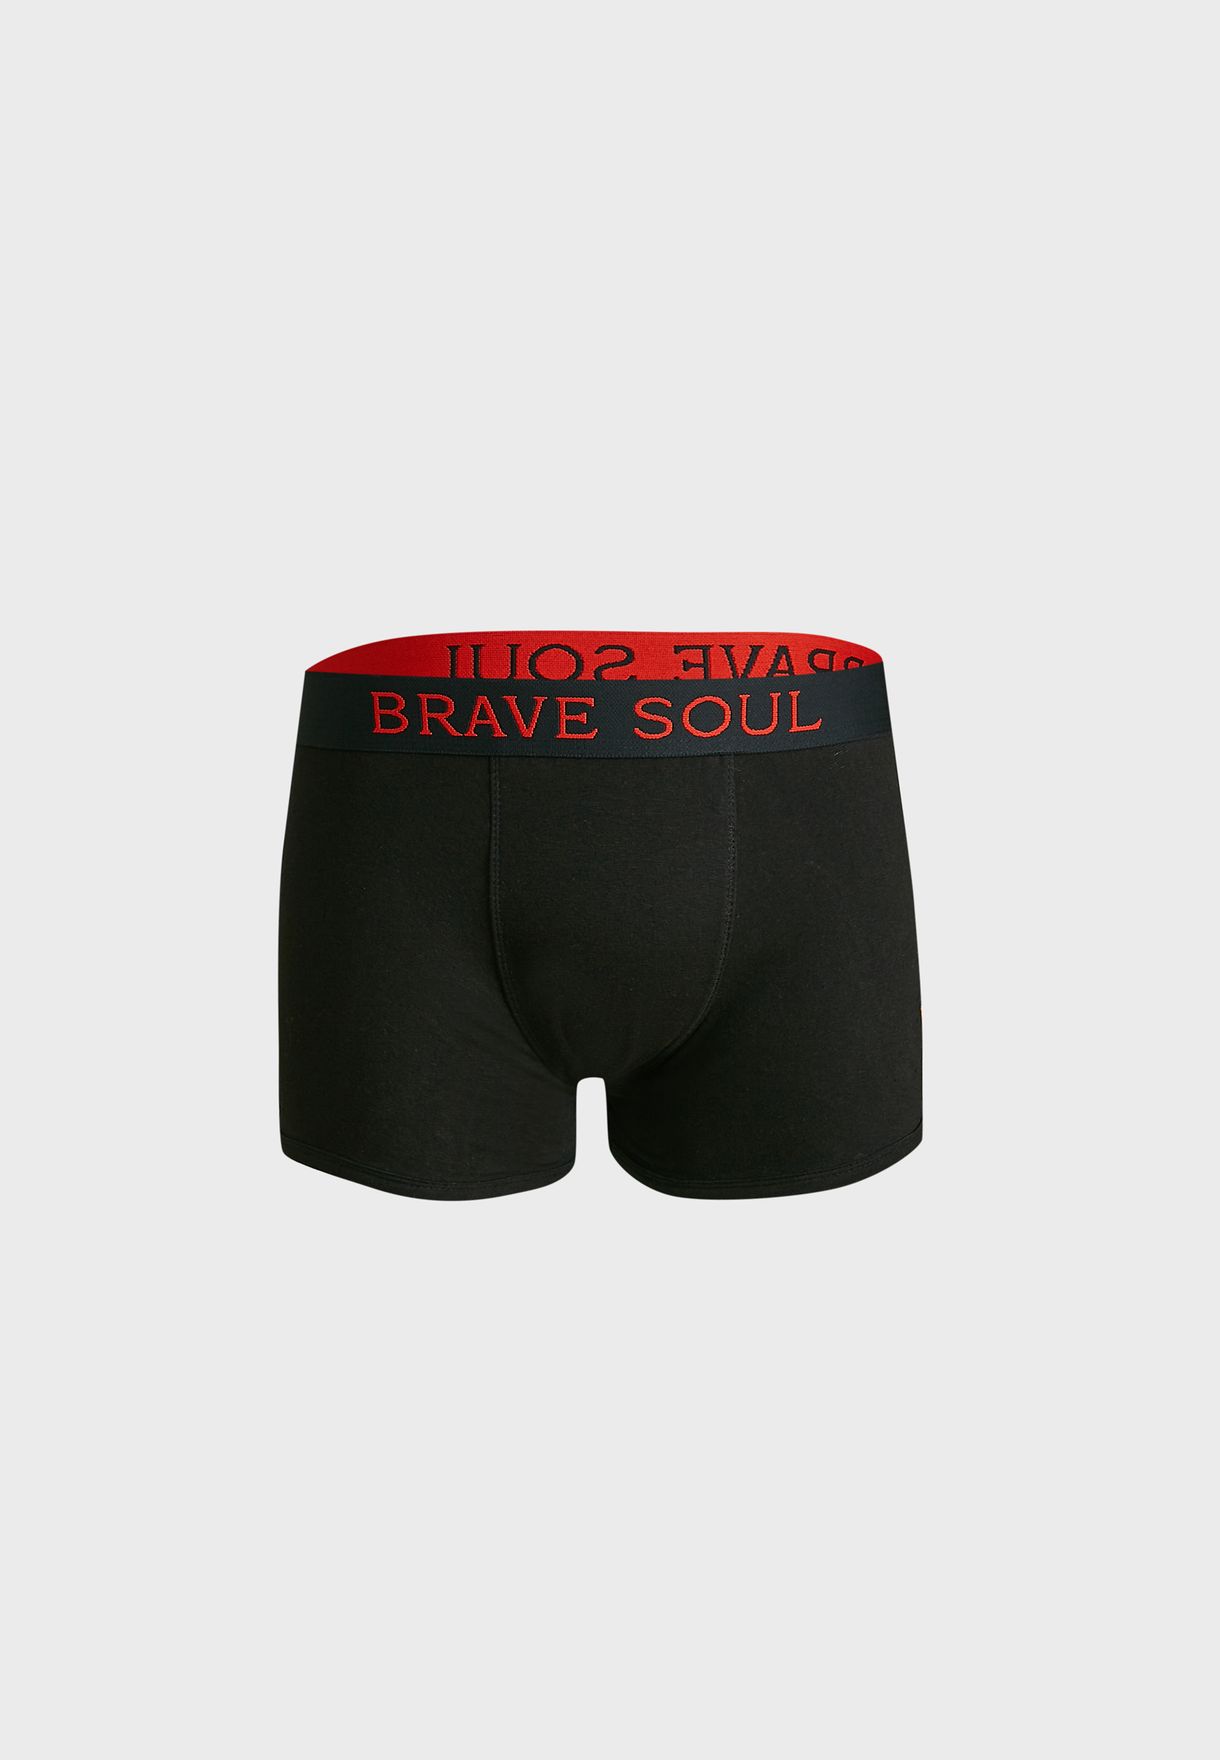 Brave_Soul Mens 3X Pack Boxer Short With